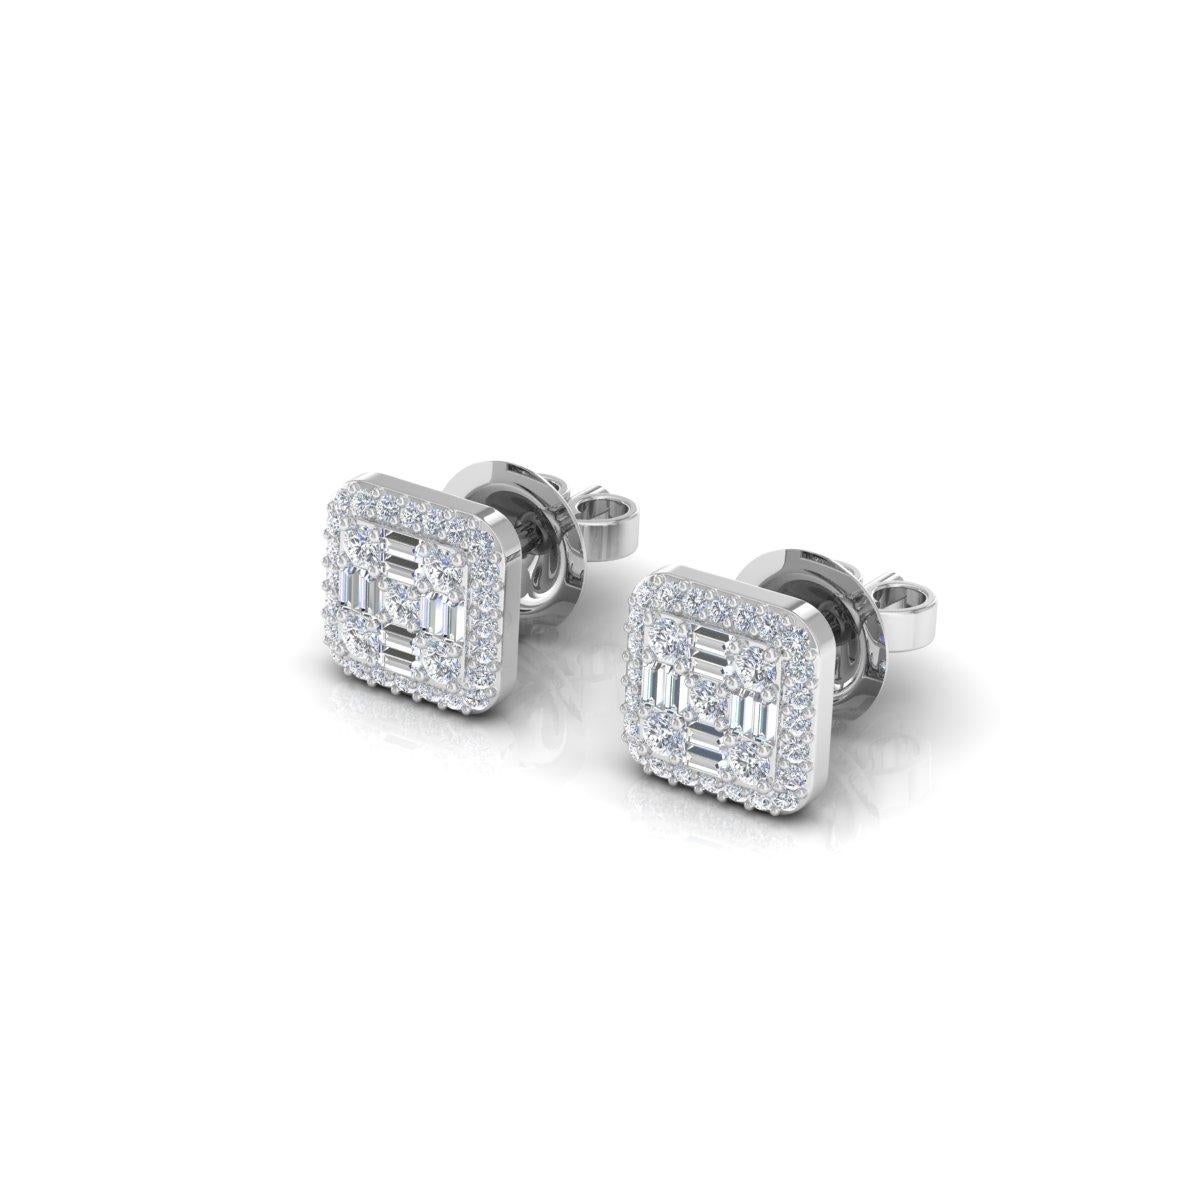 Item Code :- SJTE-10018
Gross Wt. :- 1.68 gm
10k White Gold Wt. :- 1.62 gm
Natural Diamond Wt. :- 0.32 Ct. ( AVERAGE DIAMOND CLARITY SI1-SI2 & COLOR H-I )
Earrings Size :- 7 mm approx.

✦ Sizing
.....................
We can adjust most items to fit